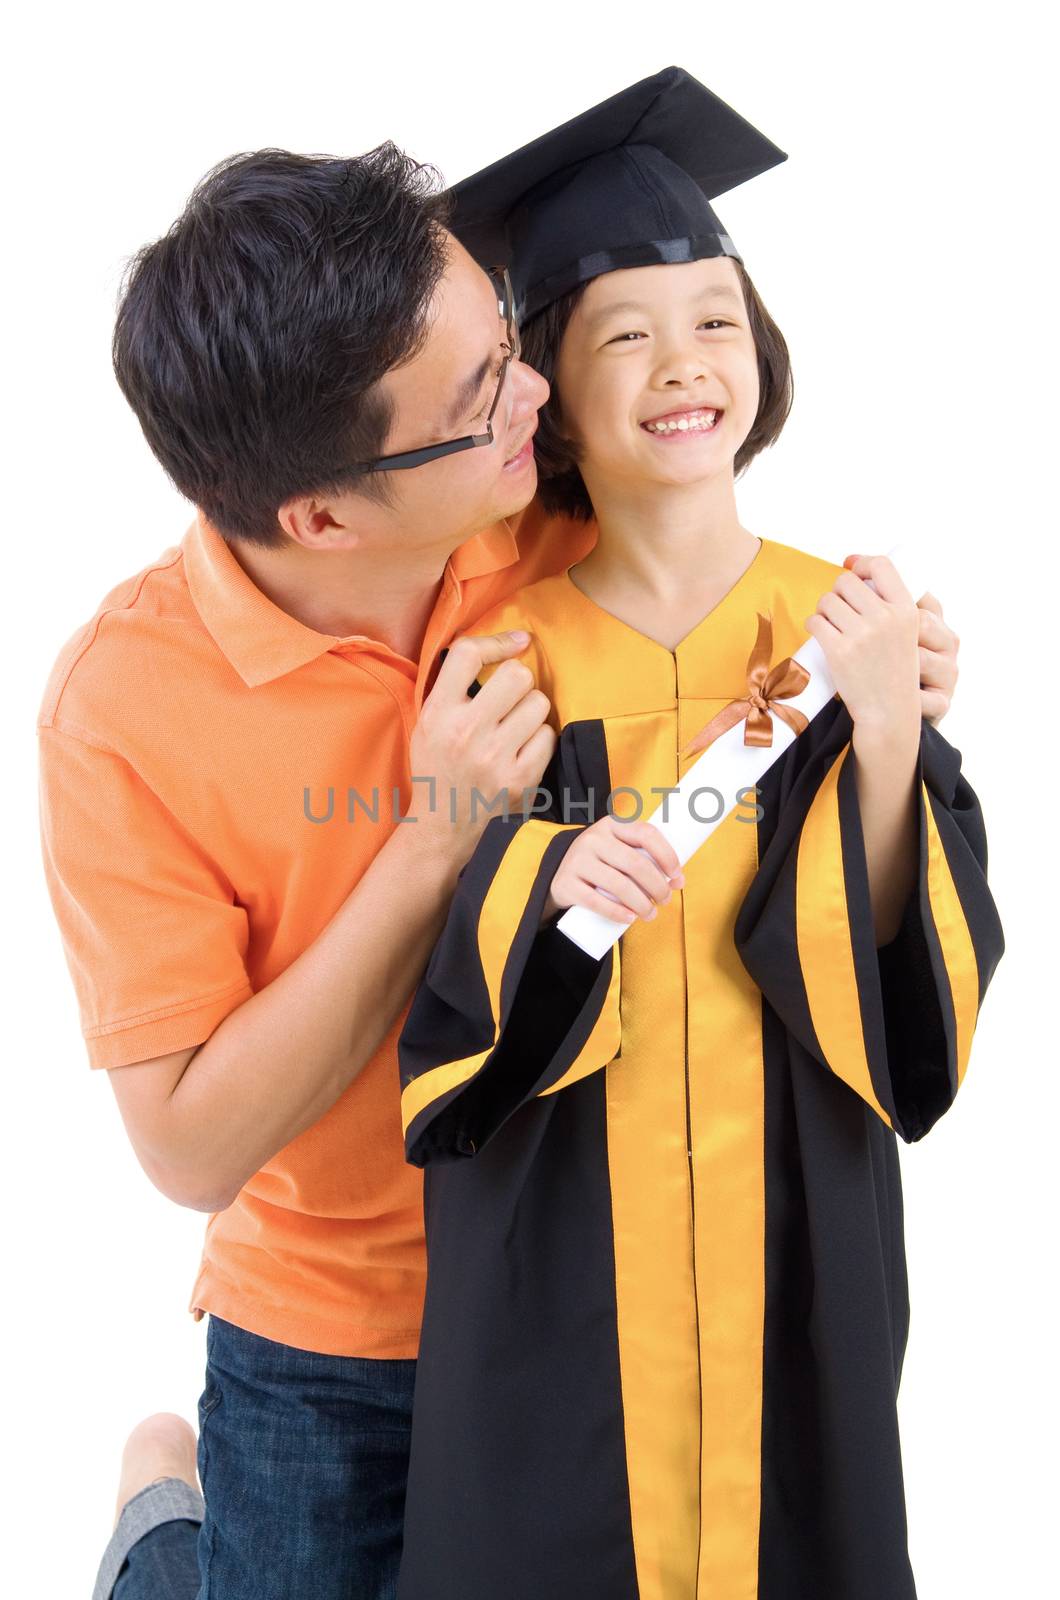 Asian daughter in graduation gown.Taking photo with her father.